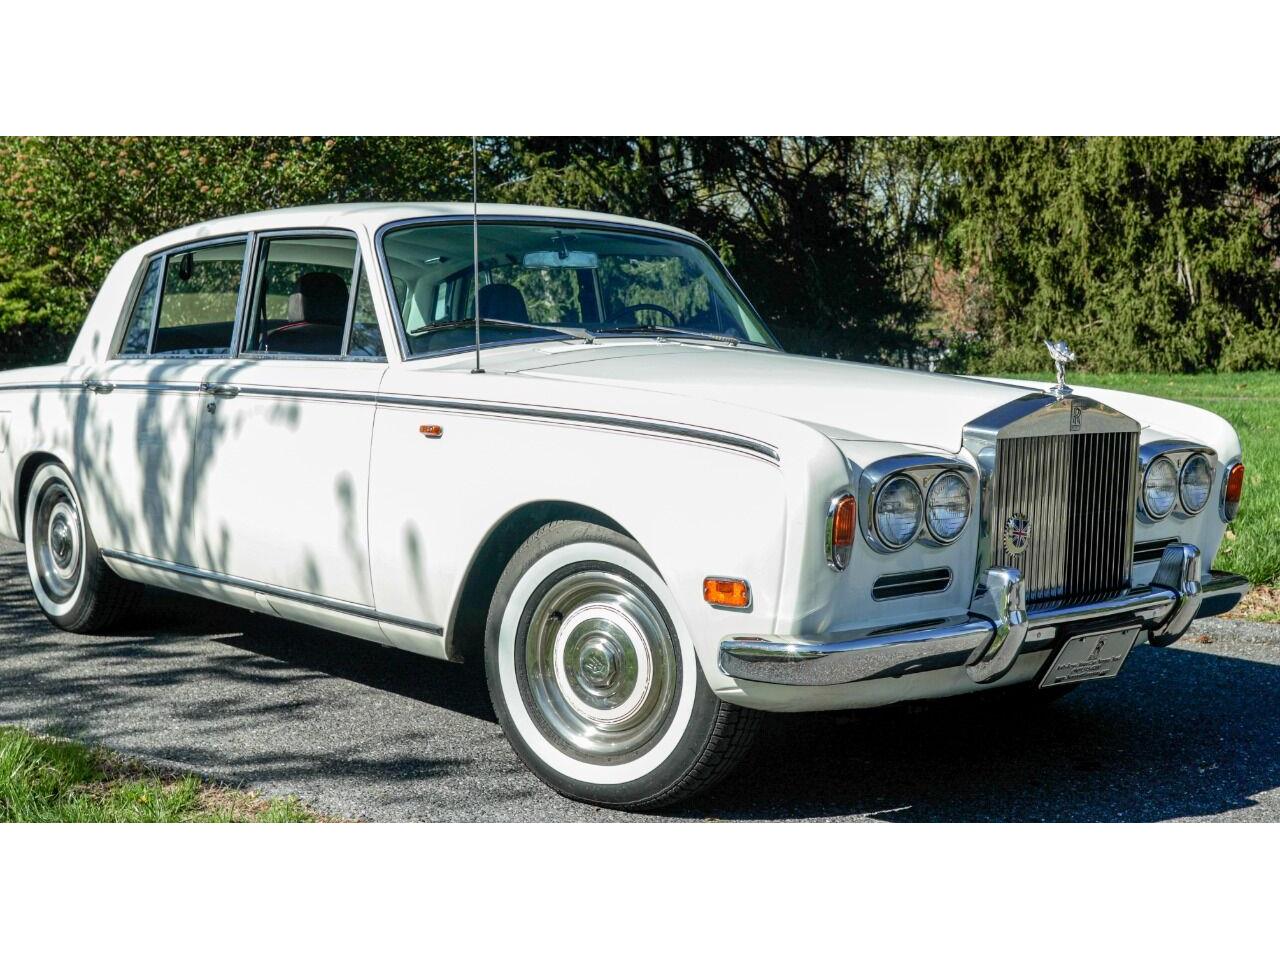 Rolls Royce for sale in Baltimore Maryland  Facebook Marketplace   Facebook